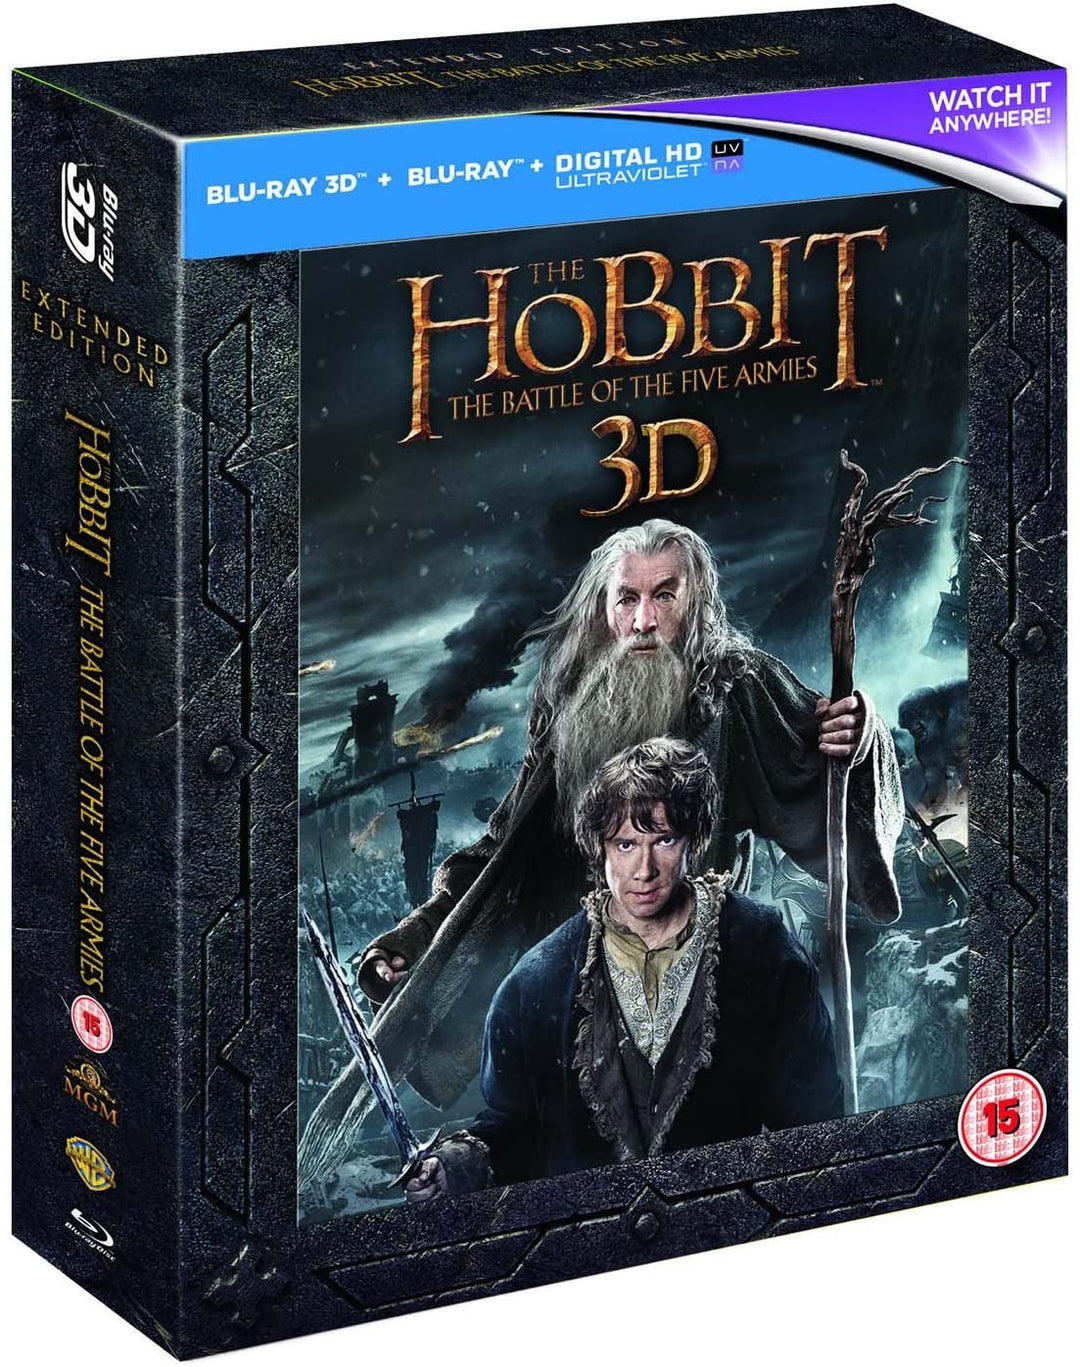 The Hobbit: The Battle Of The Five Armies 3D - Extended Edition [Blu-ray] [2014]